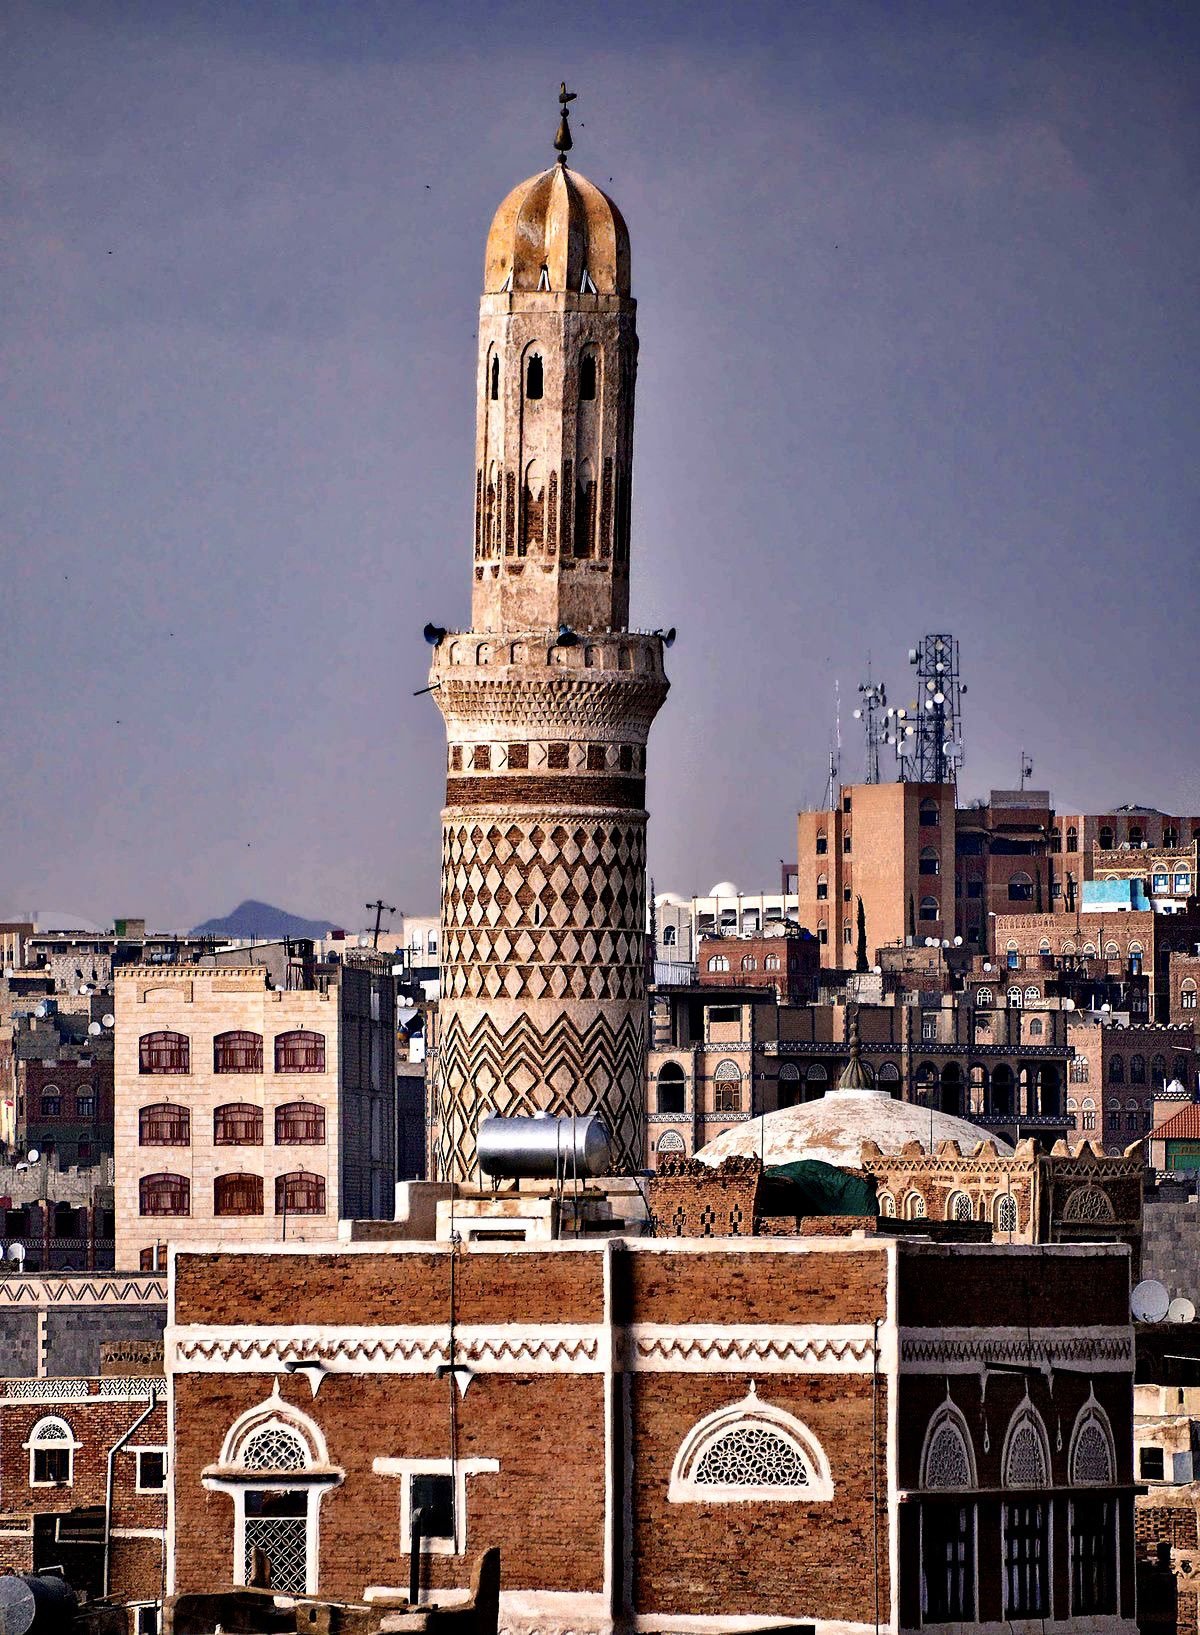 The Great Mosque of Sana'a